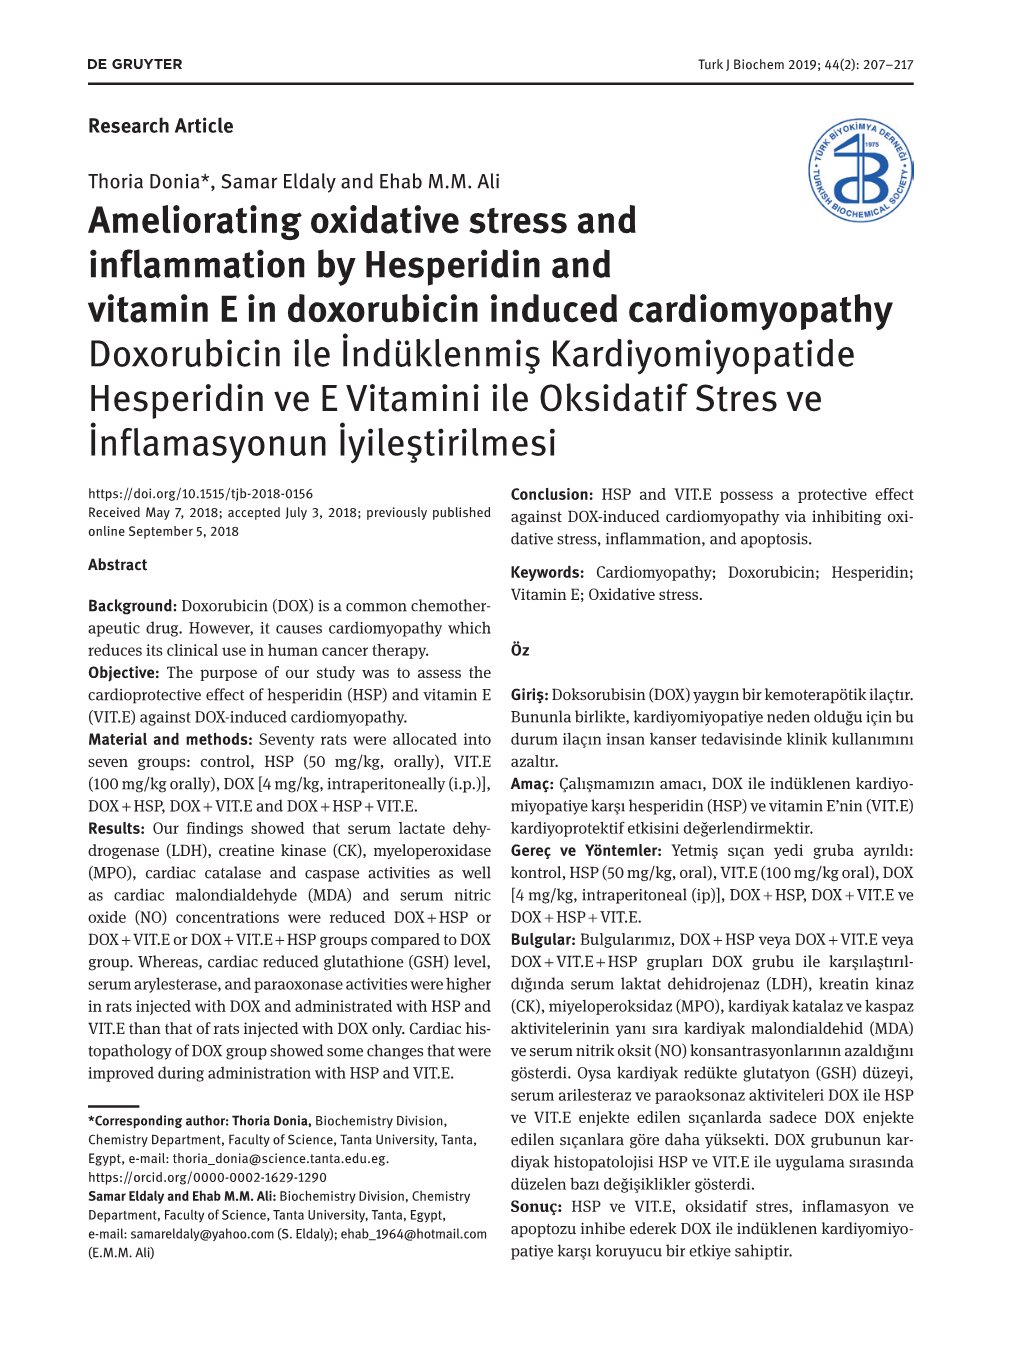 Ameliorating Oxidative Stress and Inflammation by Hesperidin And